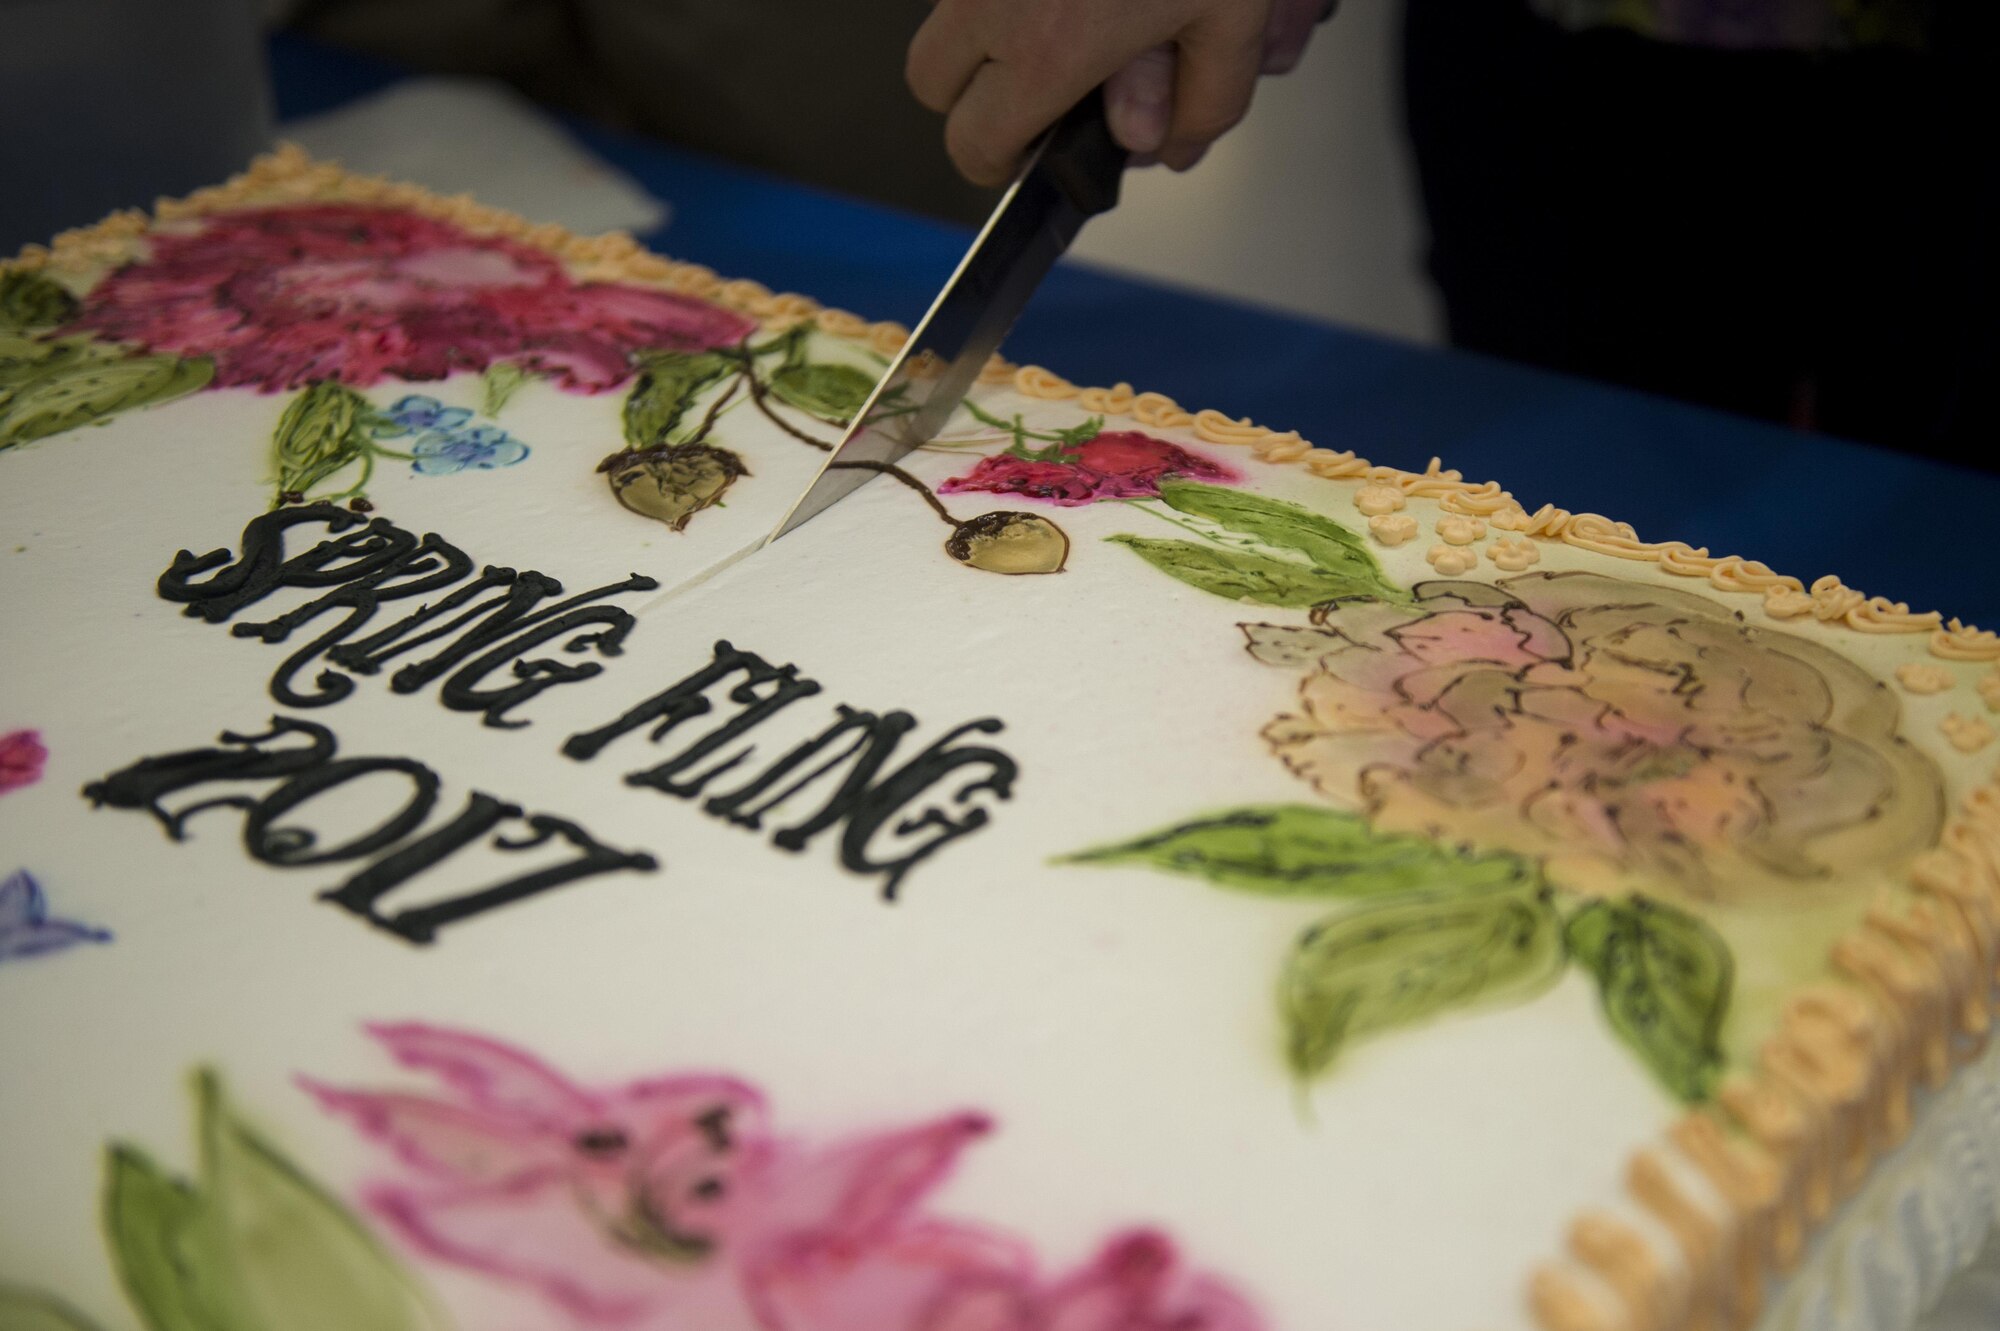 A cake is cut during the fourth annual Spring Fling event in the Base Exchange at Spangdahlem Air Base, Germany, April 14, 2017. The Exceptional Family Member Program, along with other various organizations, hosted the event to raise awareness of EFMP and the service it provides for families. (U.S. Air Force photo by Airman 1st Class Preston Cherry)